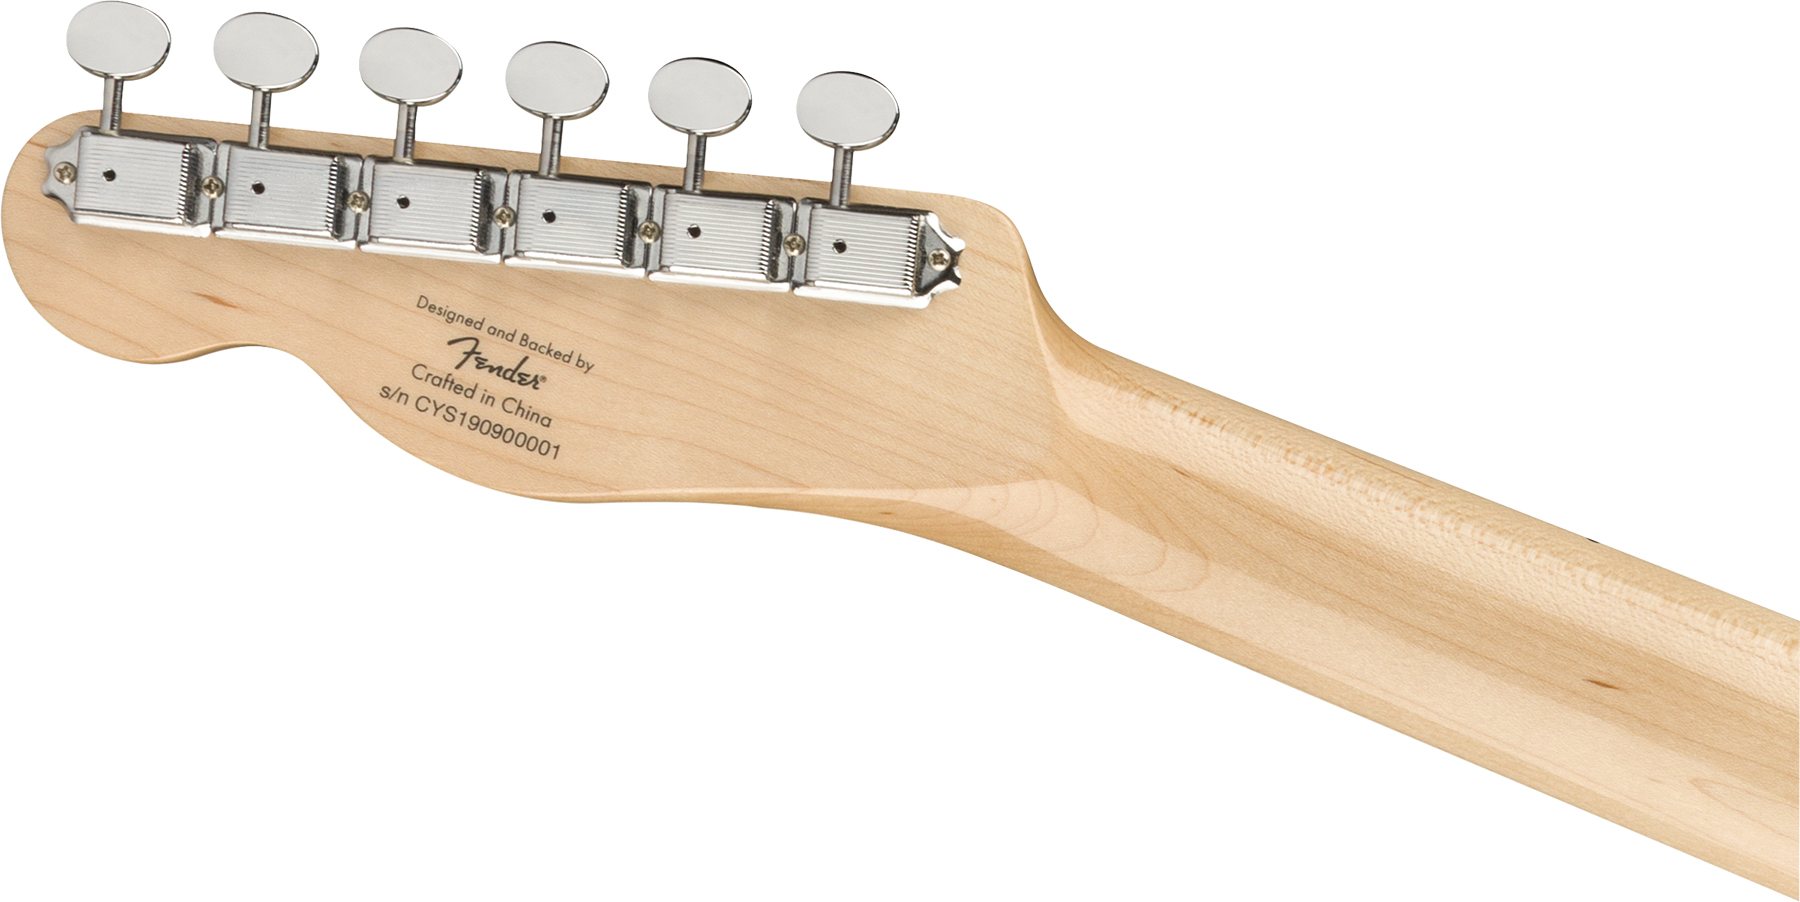 Squier Tele Offset Paranormal Ss Ht Mn - Natural - Guitarra electrica retro rock - Variation 3